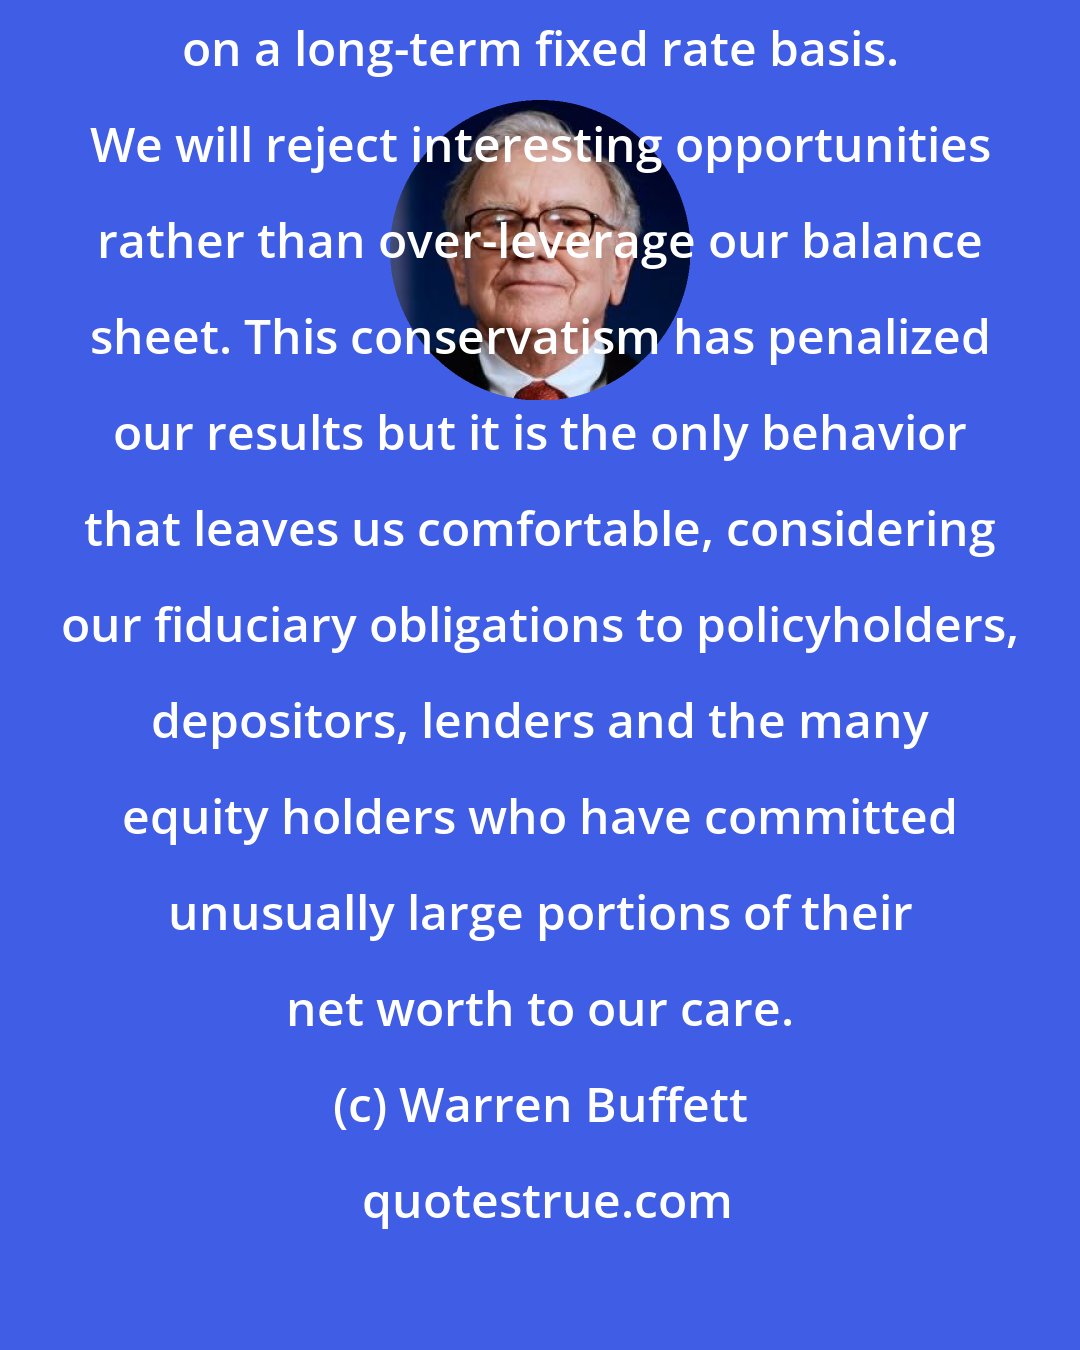 Warren Buffett: We rarely use much debt and, when we do, we attempt to structure it on a long-term fixed rate basis. We will reject interesting opportunities rather than over-leverage our balance sheet. This conservatism has penalized our results but it is the only behavior that leaves us comfortable, considering our fiduciary obligations to policyholders, depositors, lenders and the many equity holders who have committed unusually large portions of their net worth to our care.